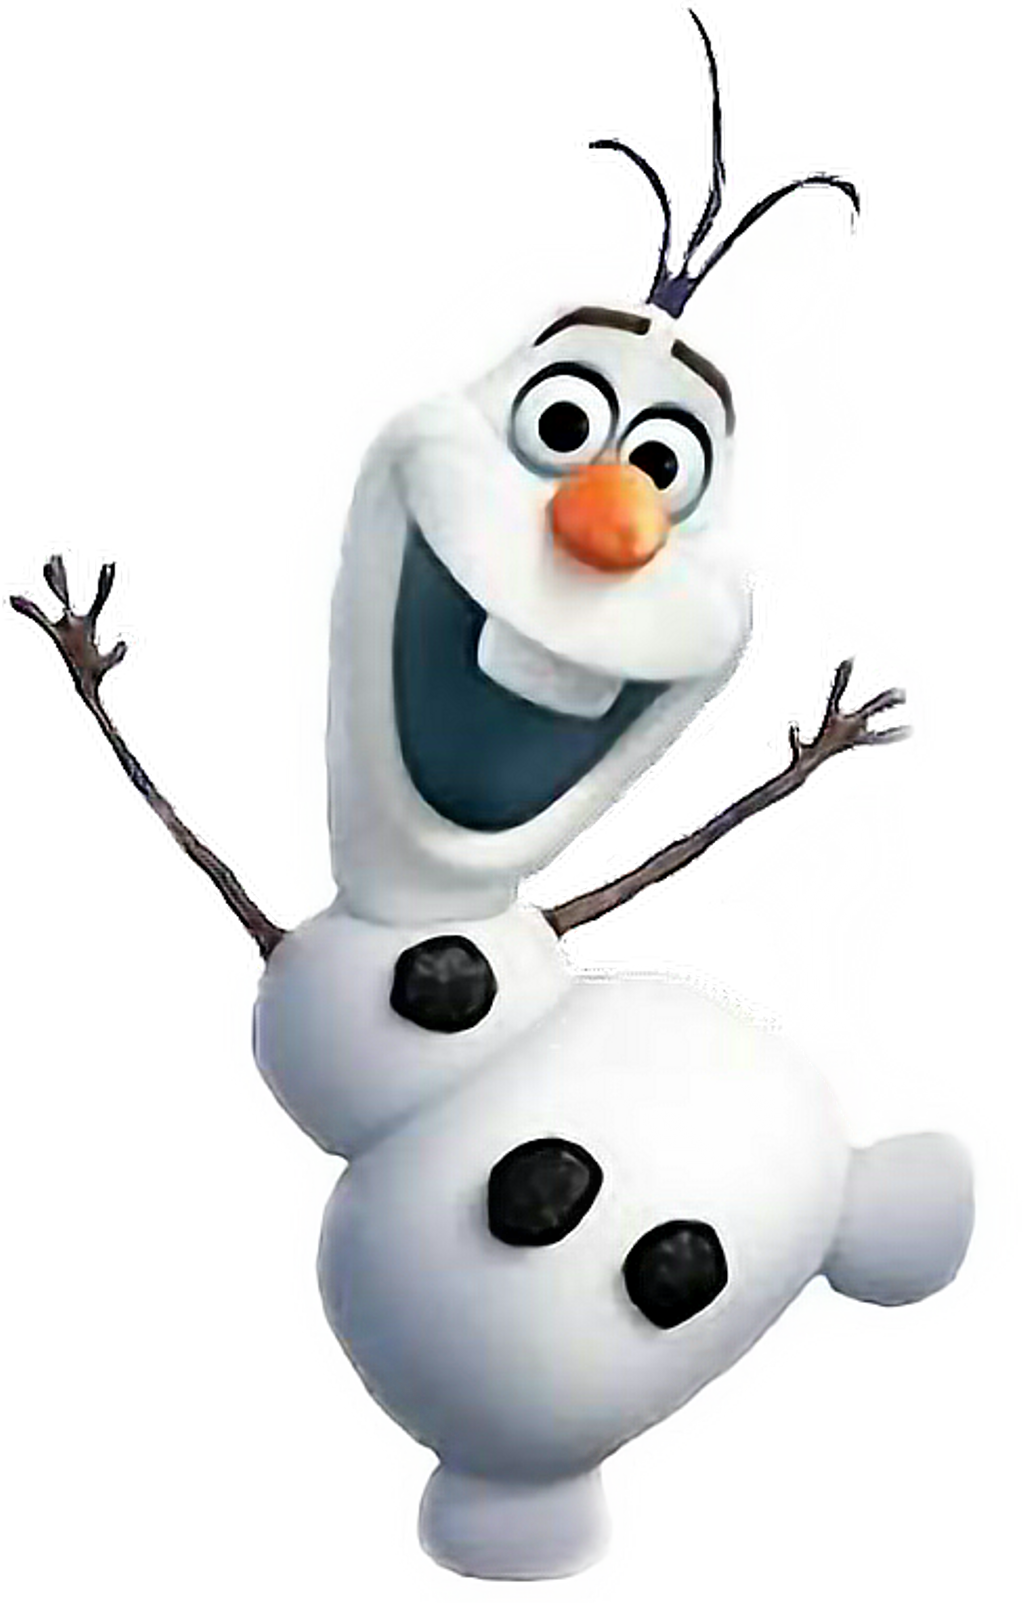 Disney freetoedit sticker by. Olaf clipart cut out